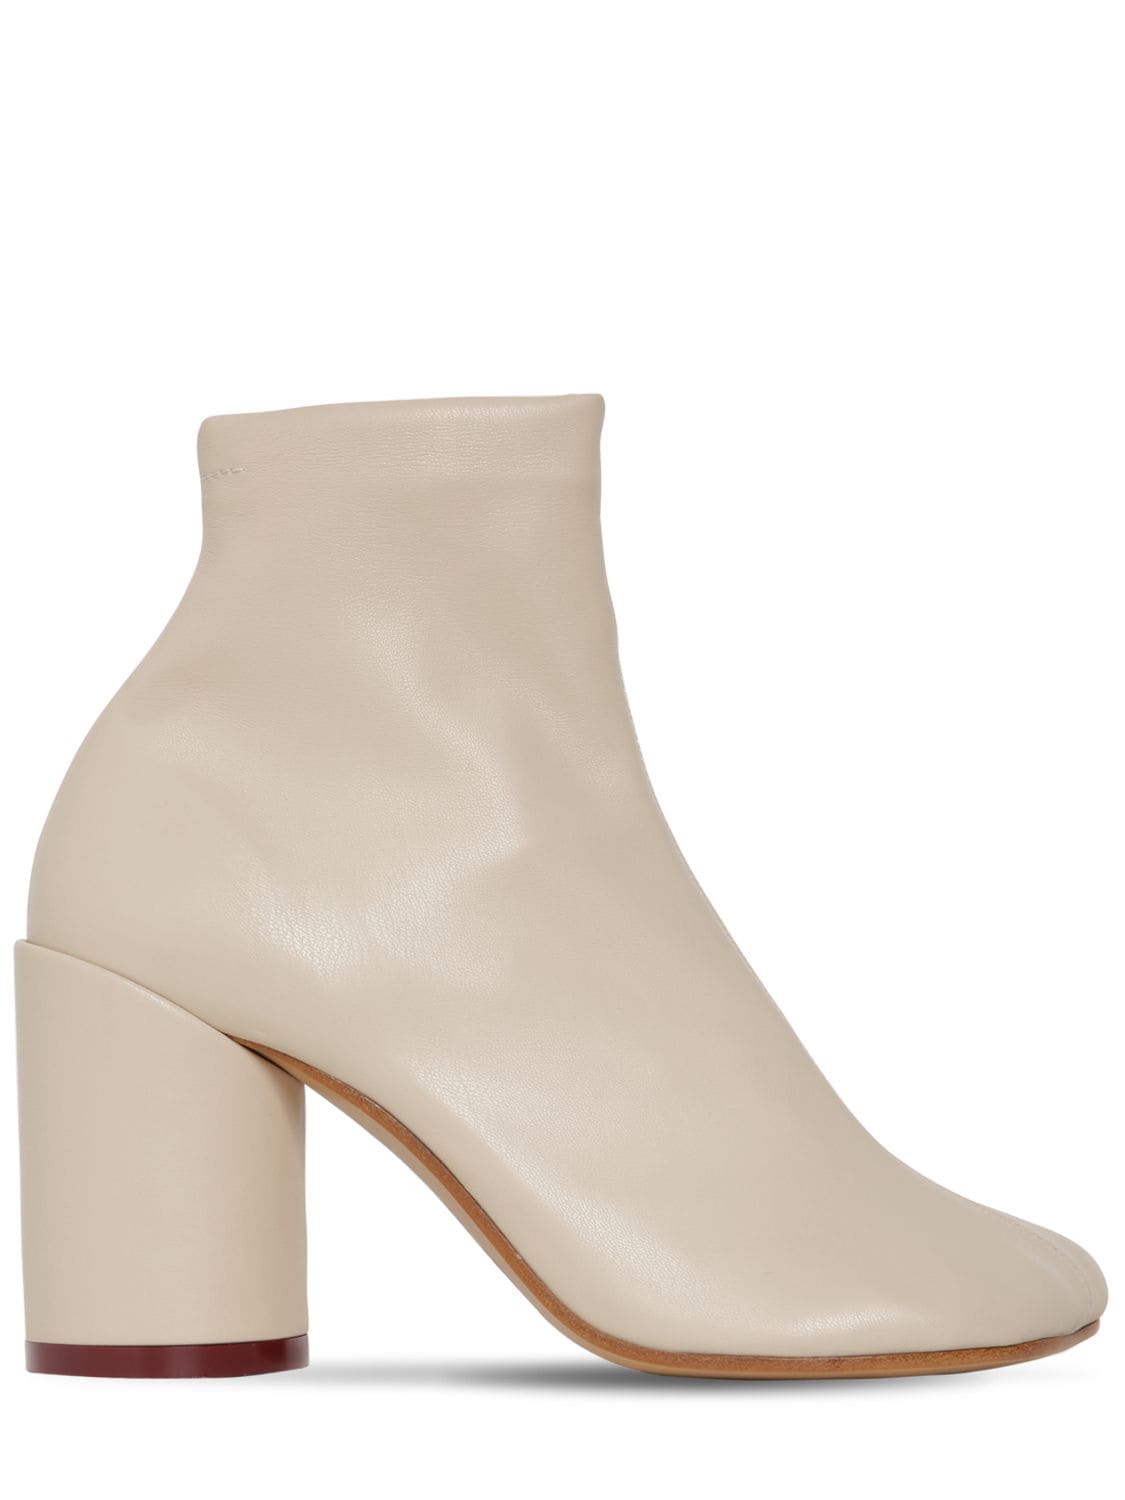 Mm6 Maison Margiela 90mm Stretch Faux Leather Boots In Natural